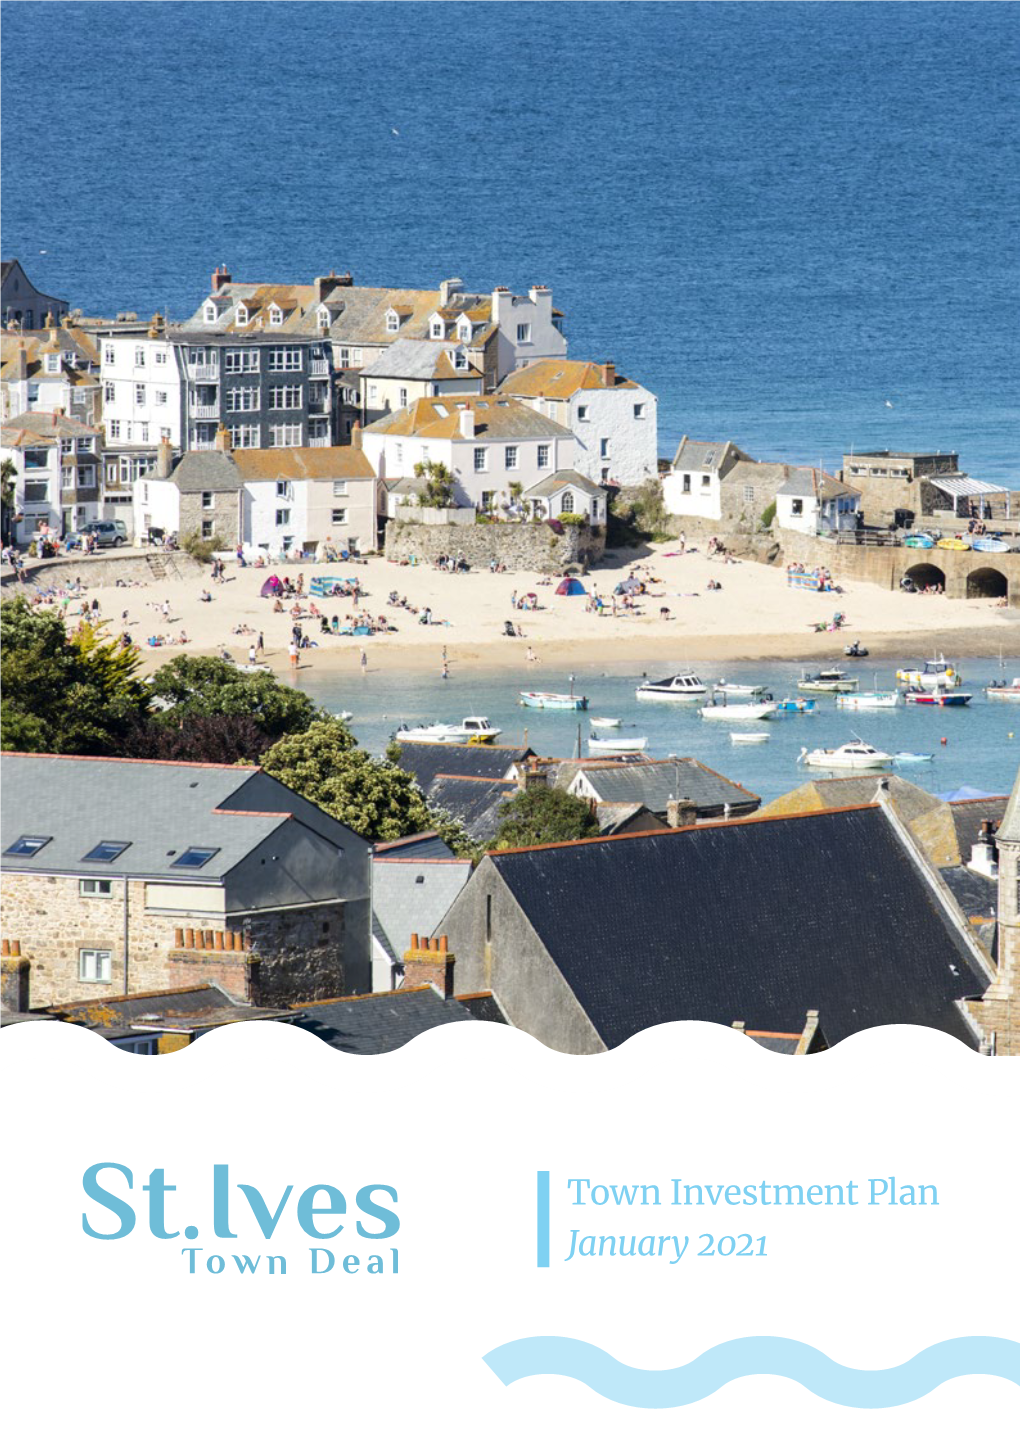 ST IVES Town Investment Plan